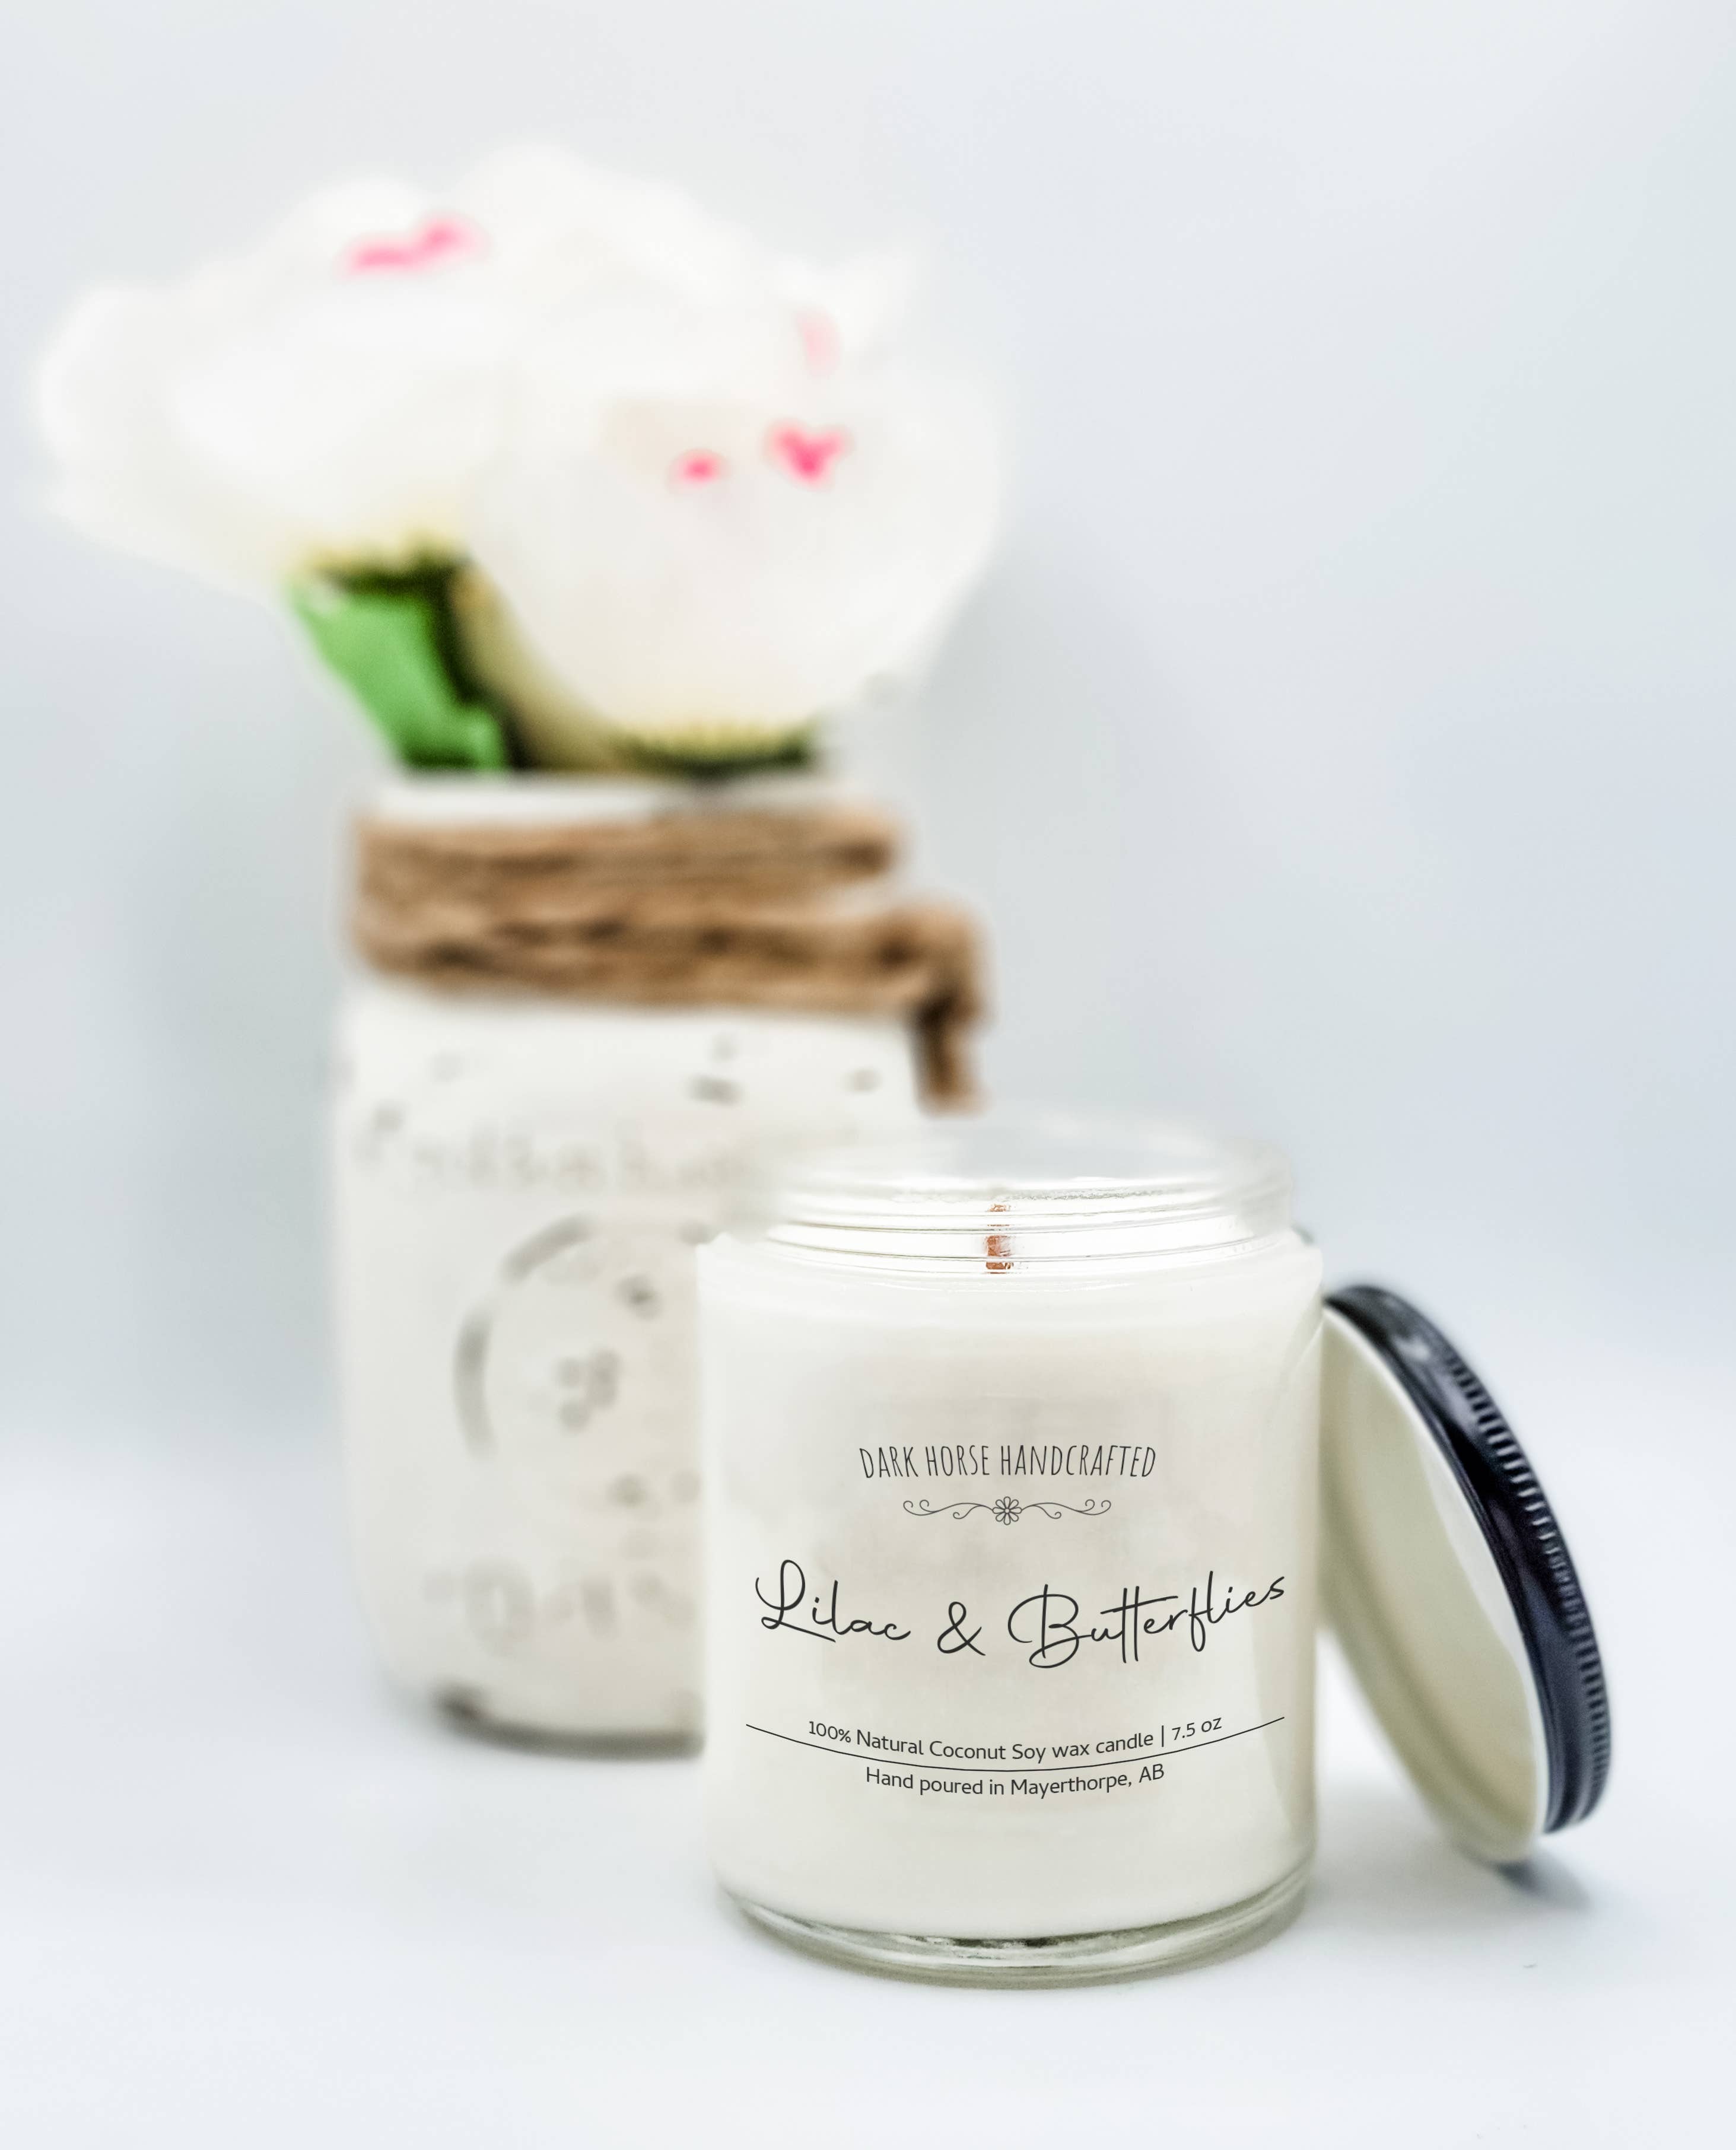 Lilac & Butterflies - 100% Natural Coconut Soy Wax Candle